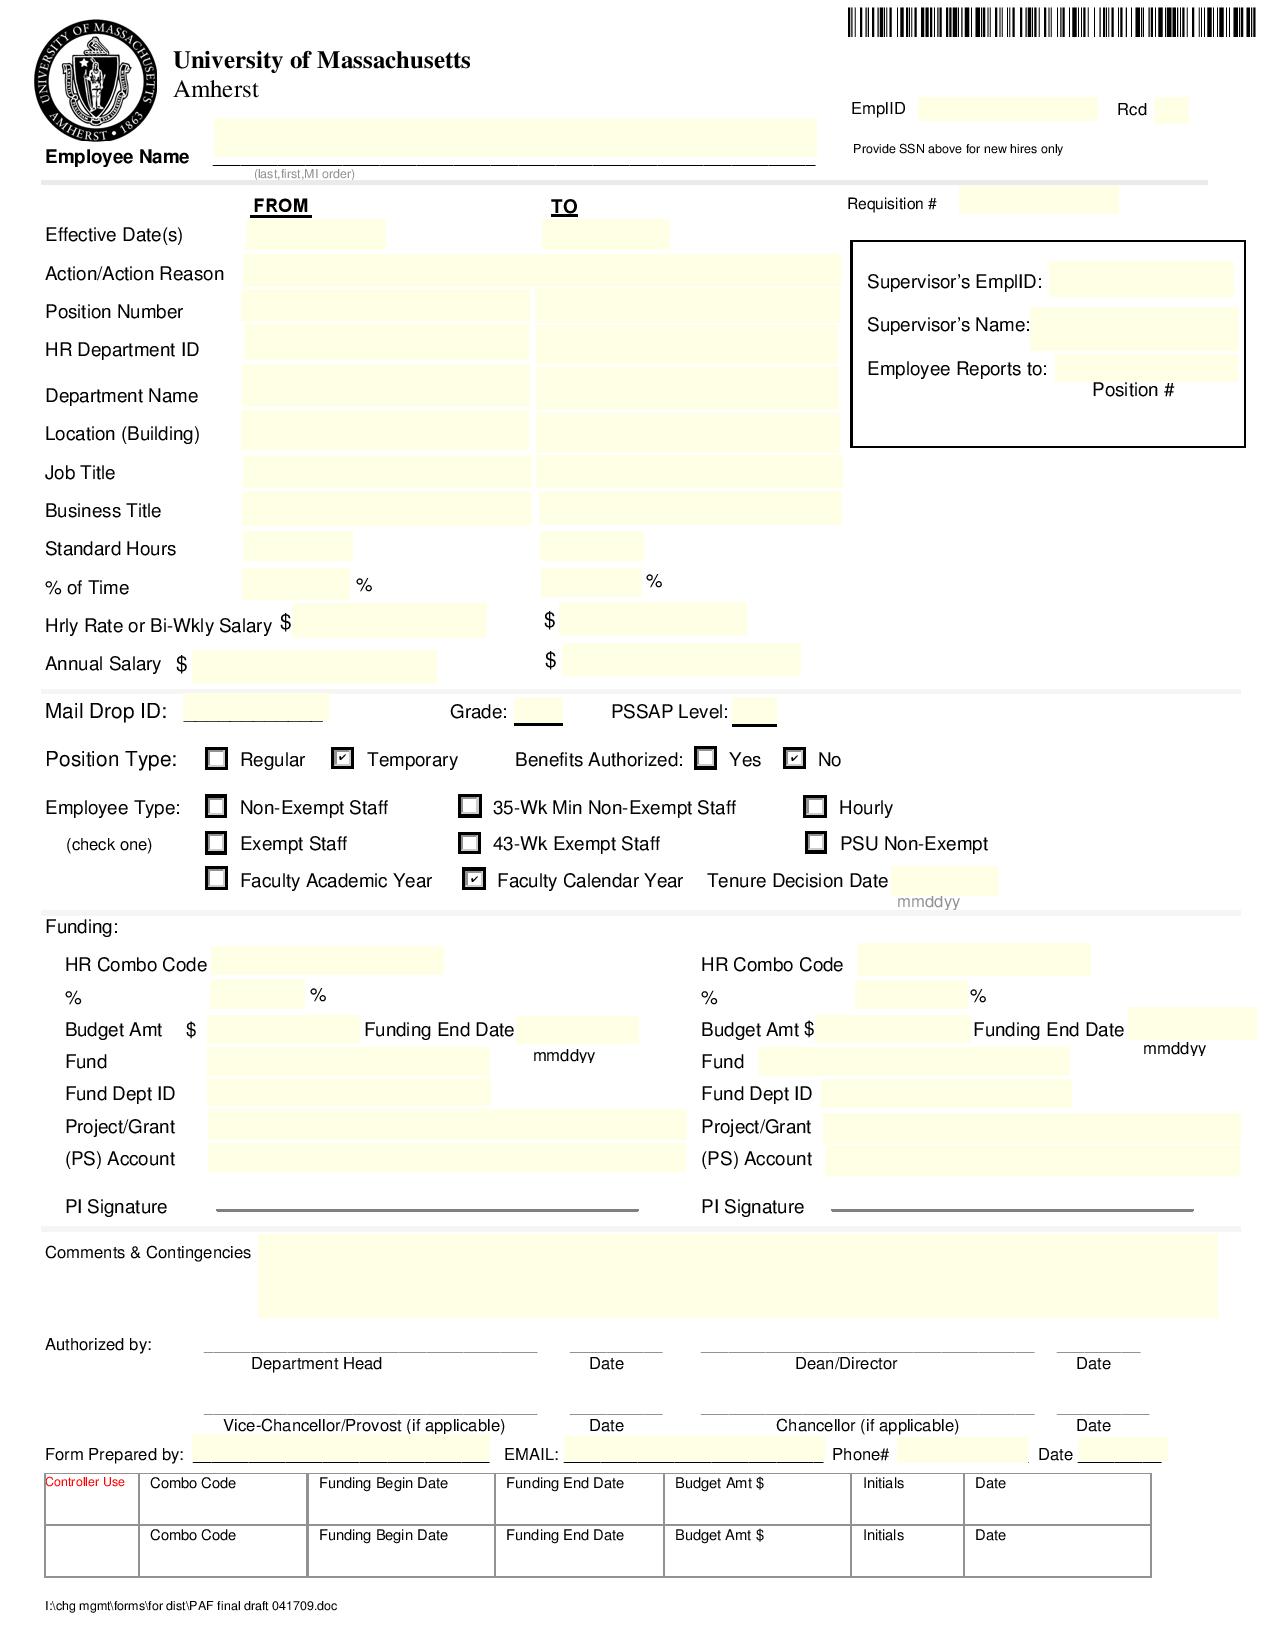 paf personnel action form template page 001